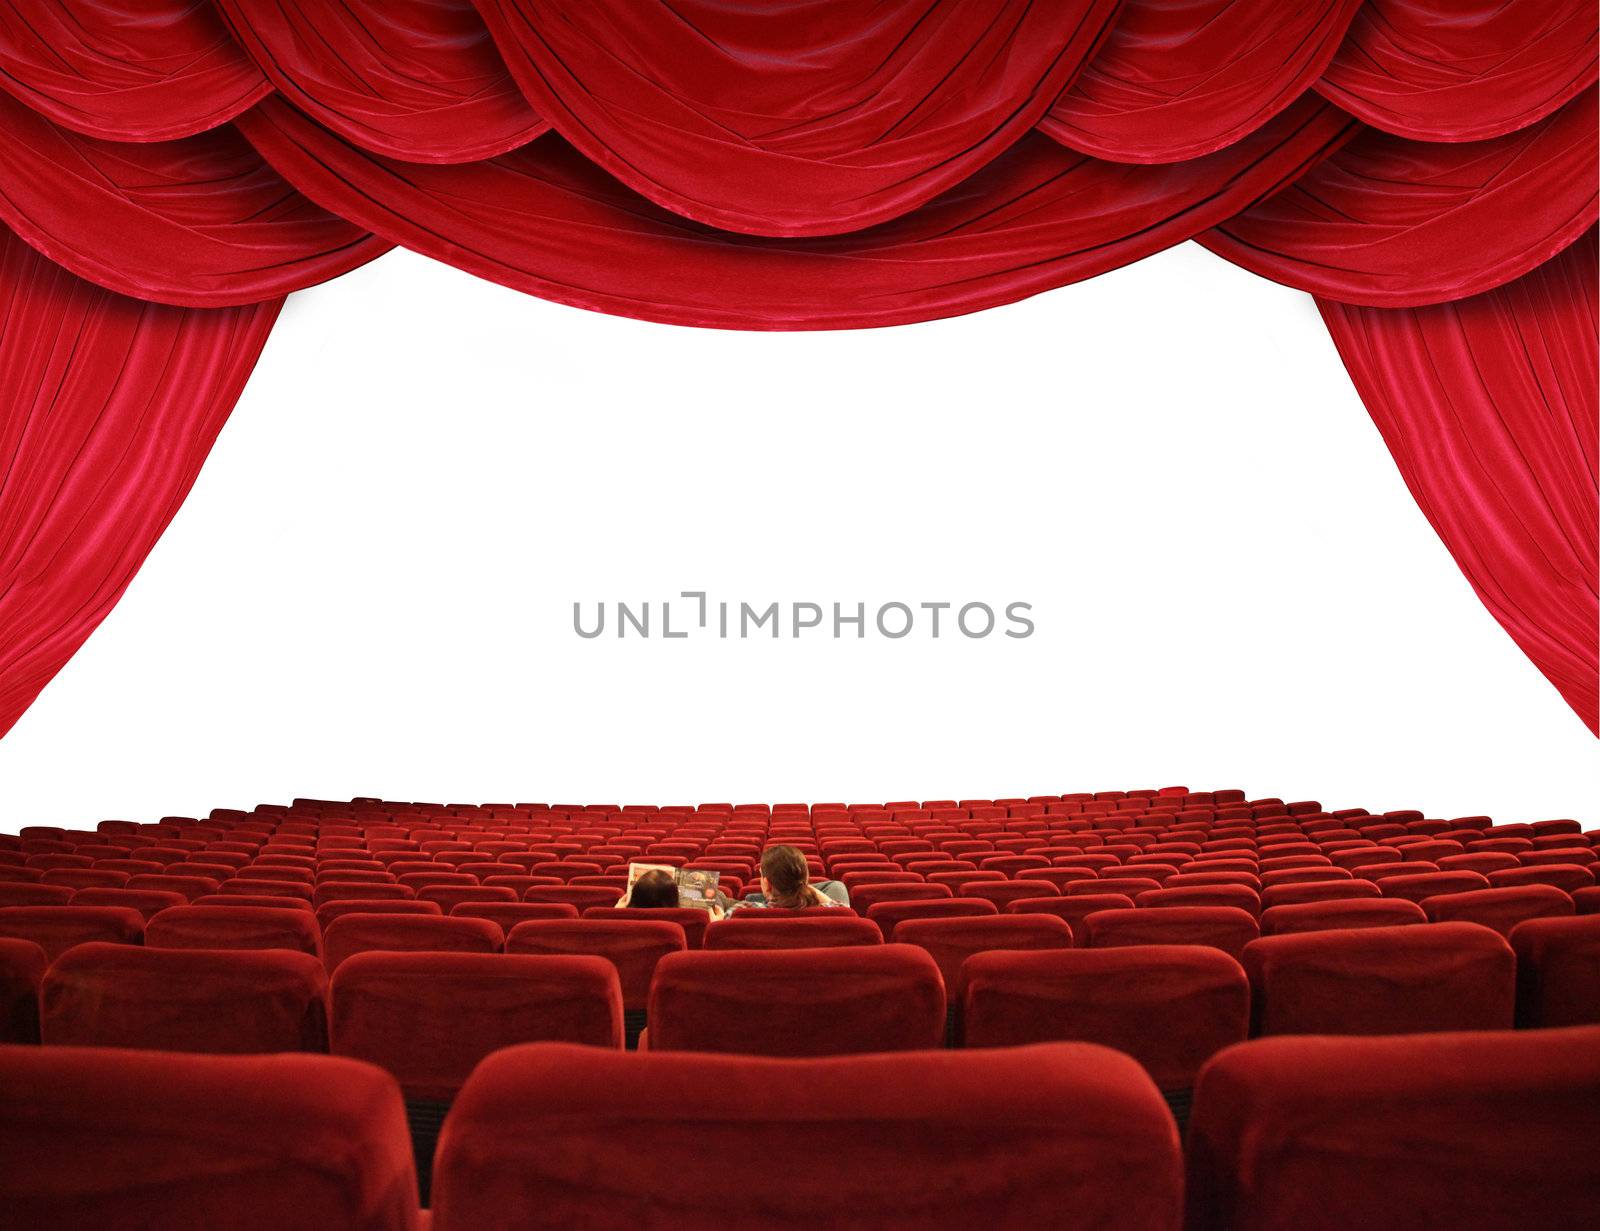 classic cinema with red seats